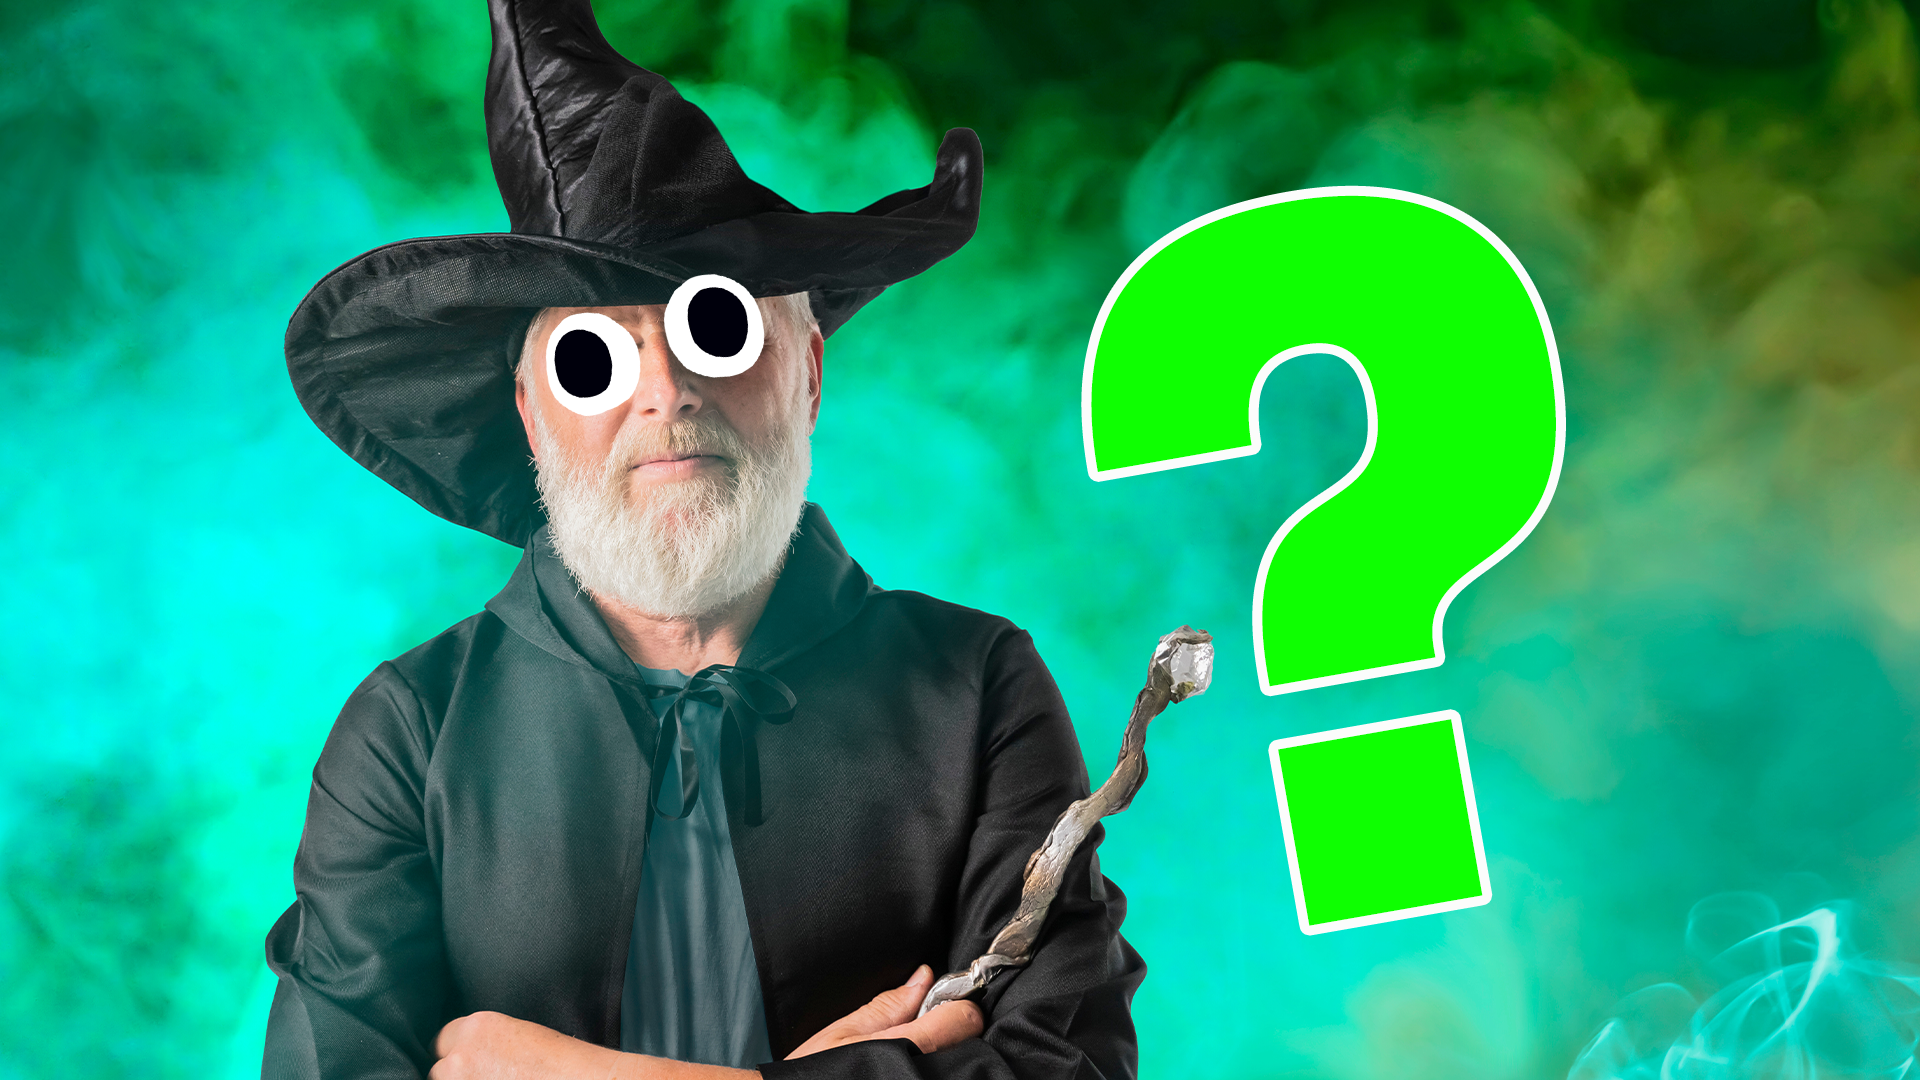 Wizard and a green question mark